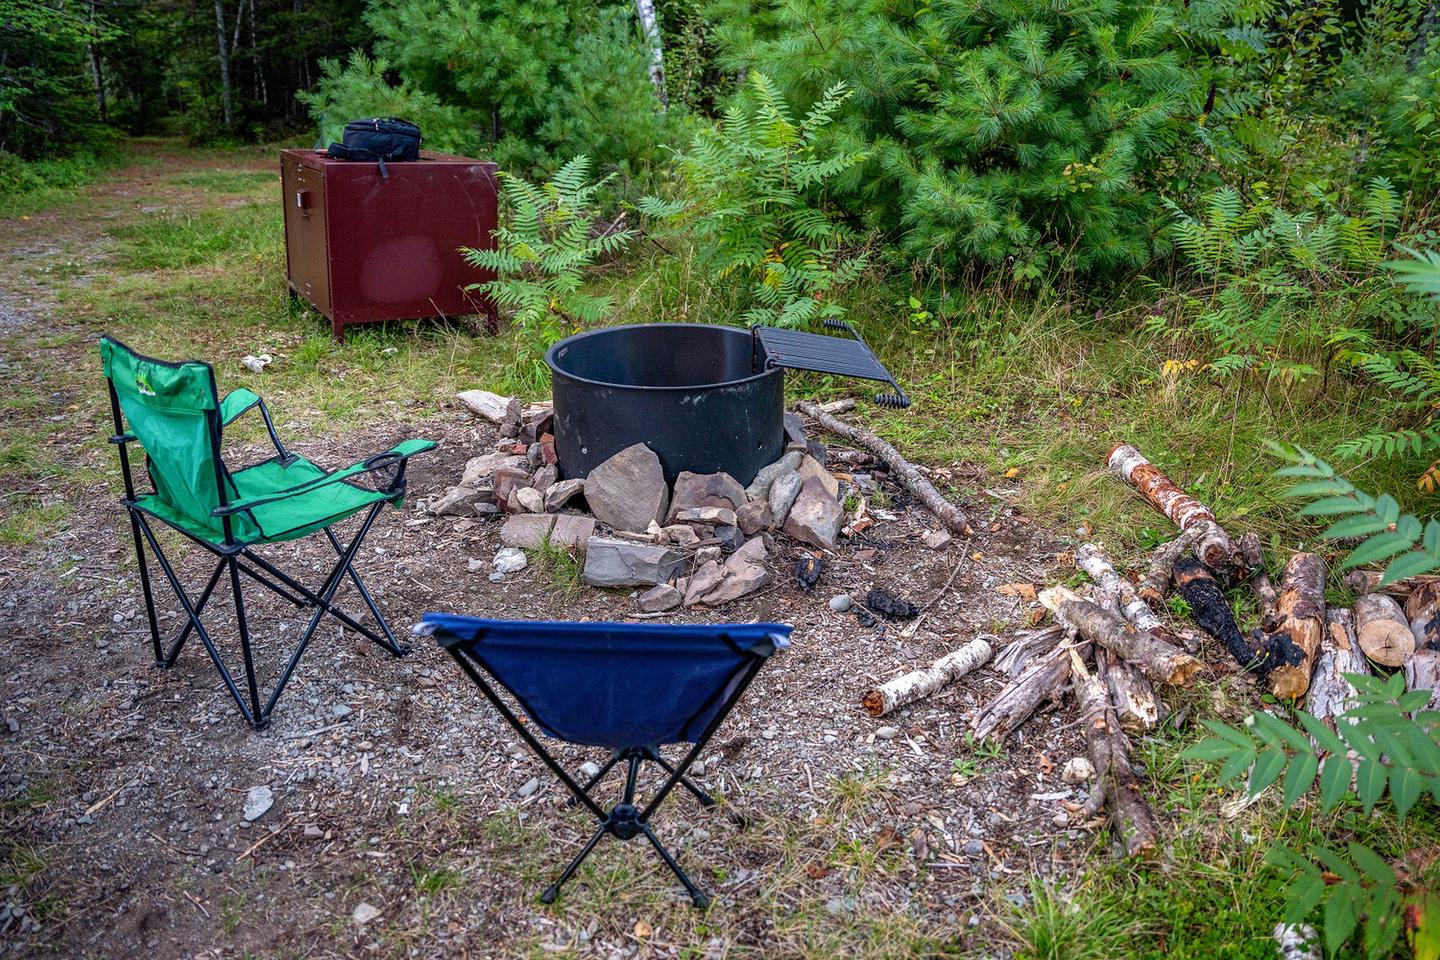 A metal fire ring at a campsite during the daytime. There are two camping chairs next to the empty fire ring with large rocks and firewood on the ground around it. A brown metal food storage box is adjacent to the fire ring. Green grass, brush, and trees border the campsite.Remember to call Maine Forest Service at 207-435-7963 for a fire permit.